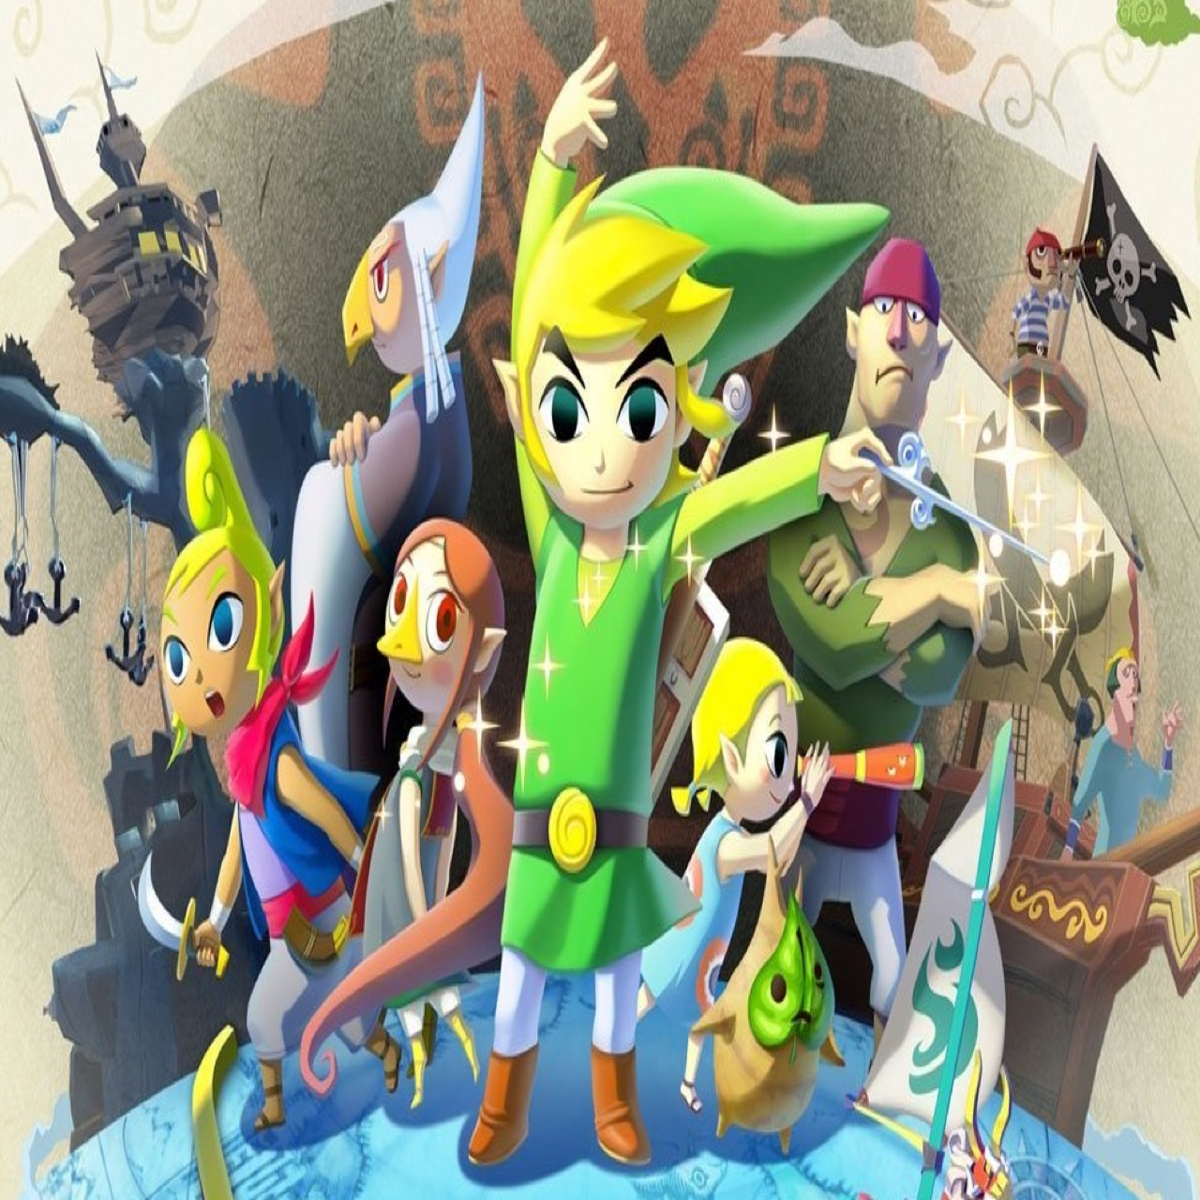 Where Are The Wind Waker And Twilight Princess Switch Remasters At?